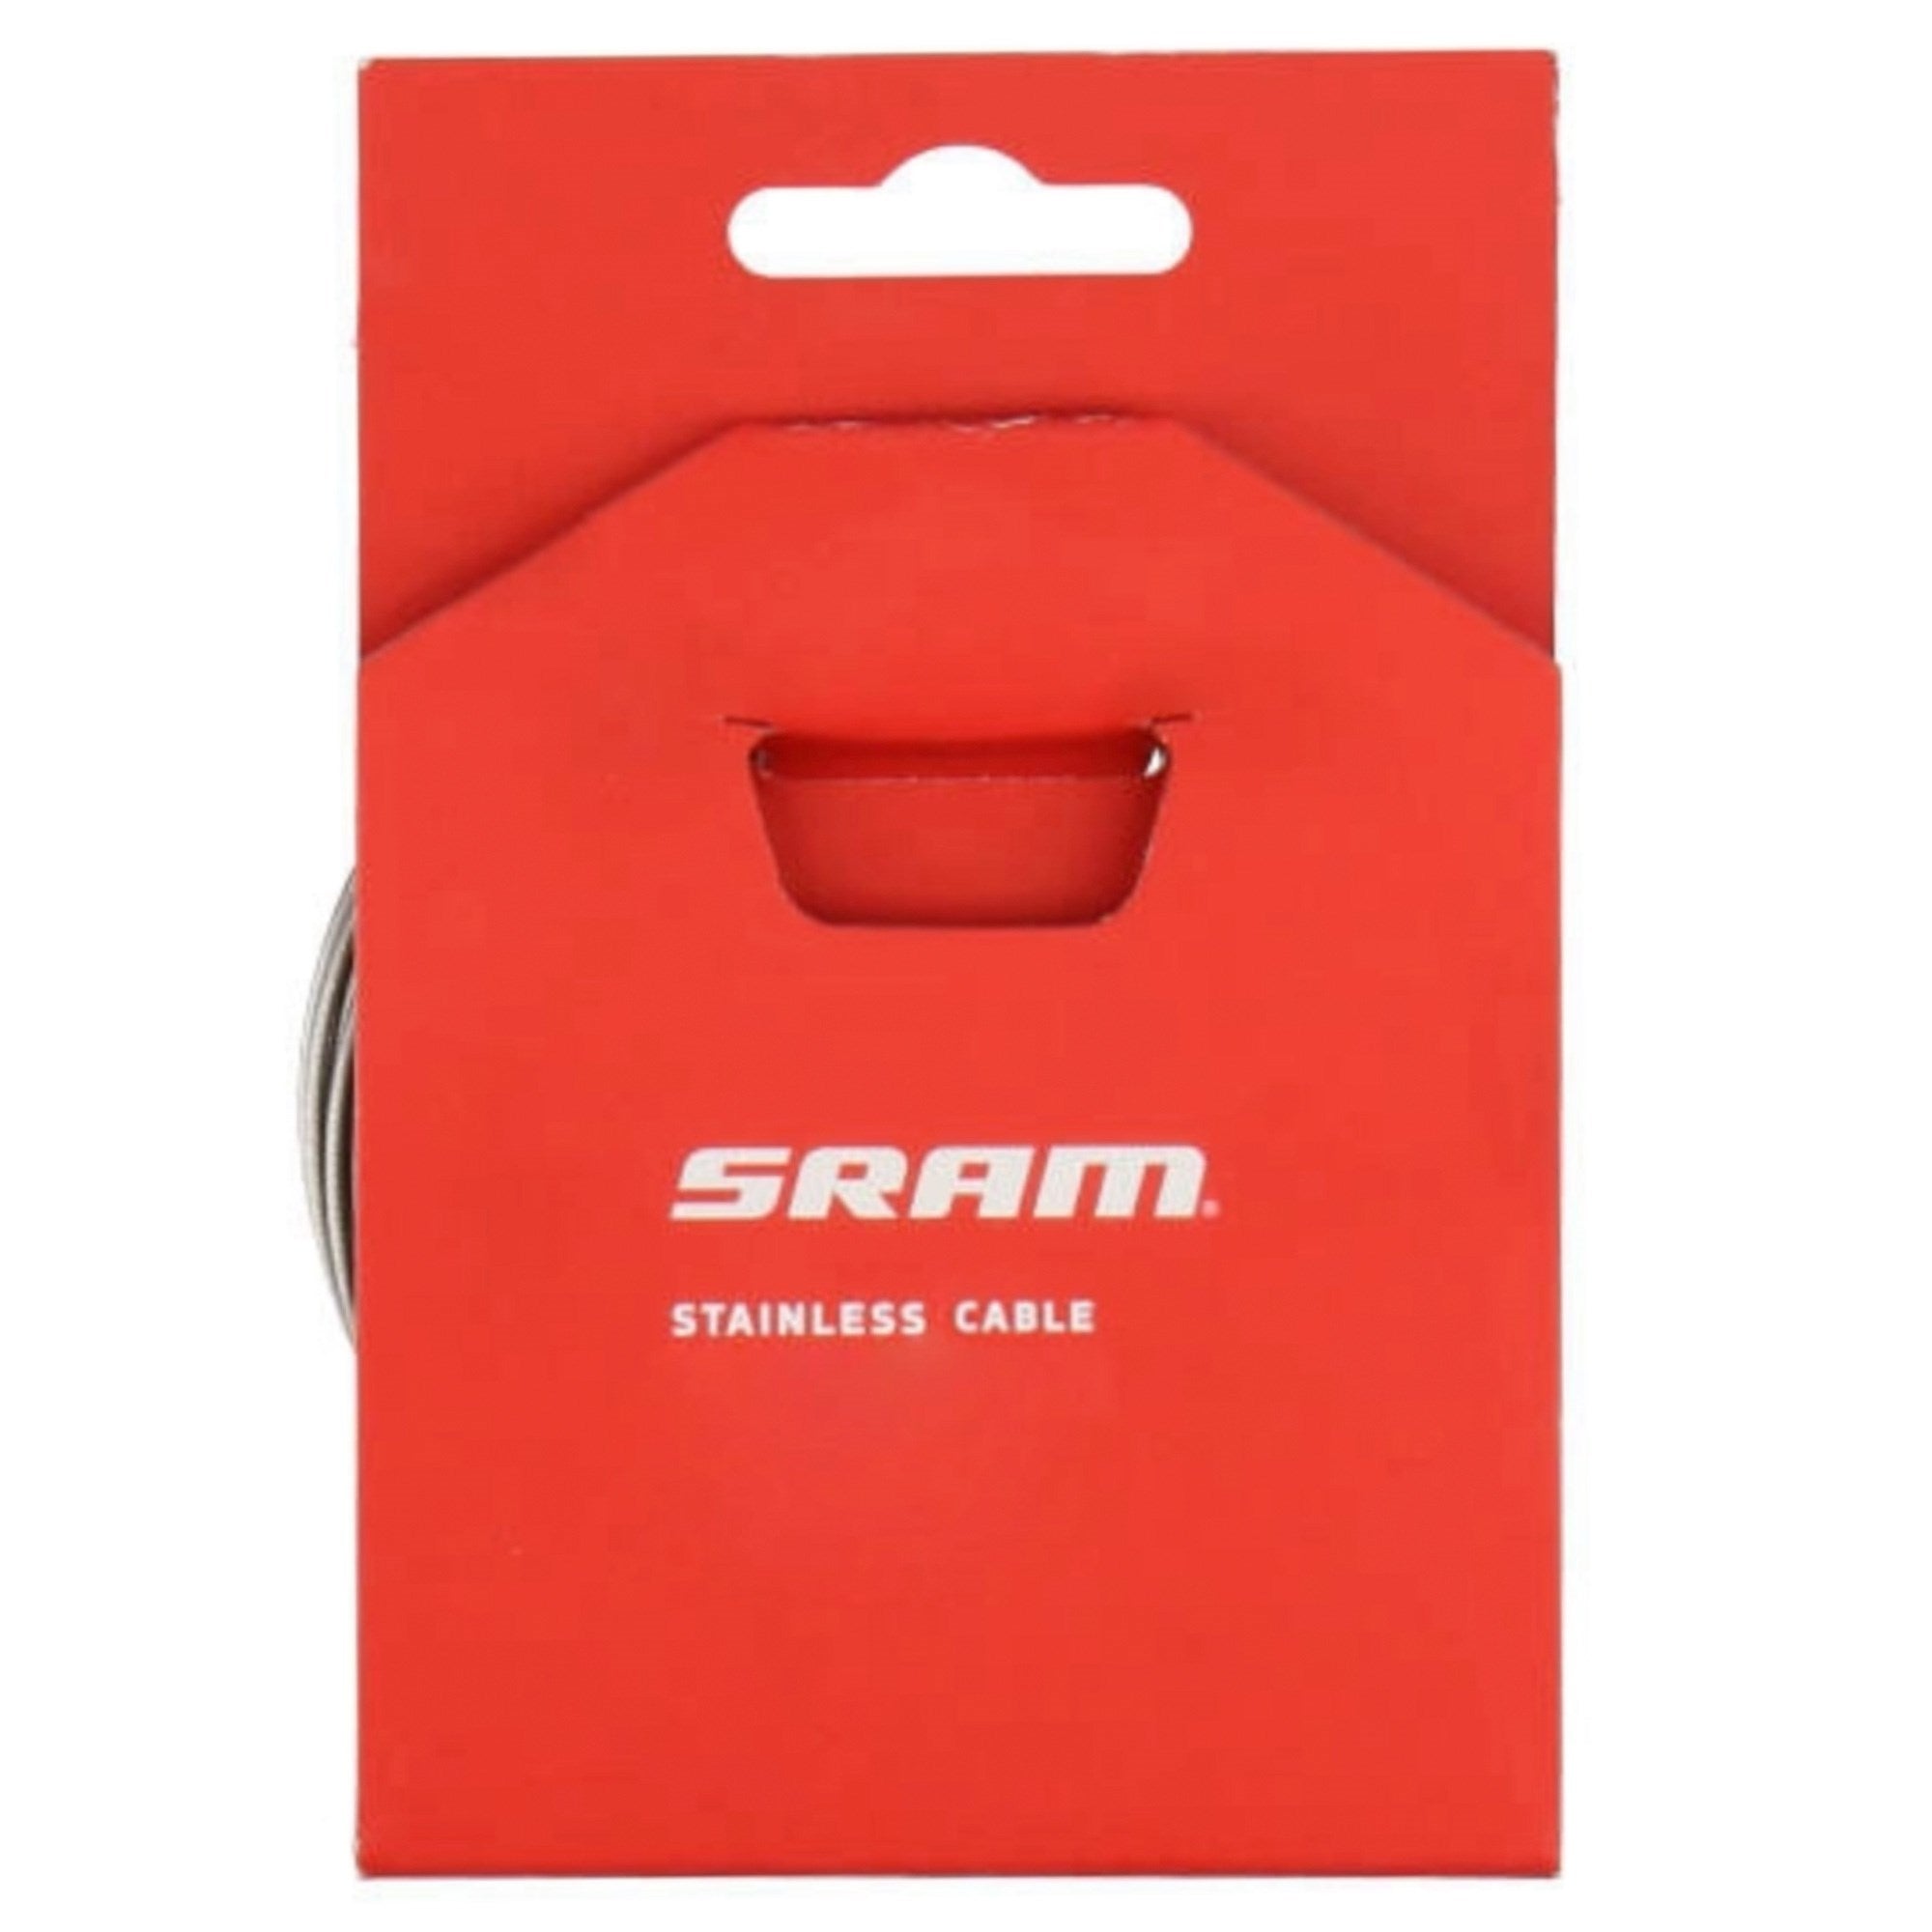 SRAM Stainless Steel Gear Cable 2200mm